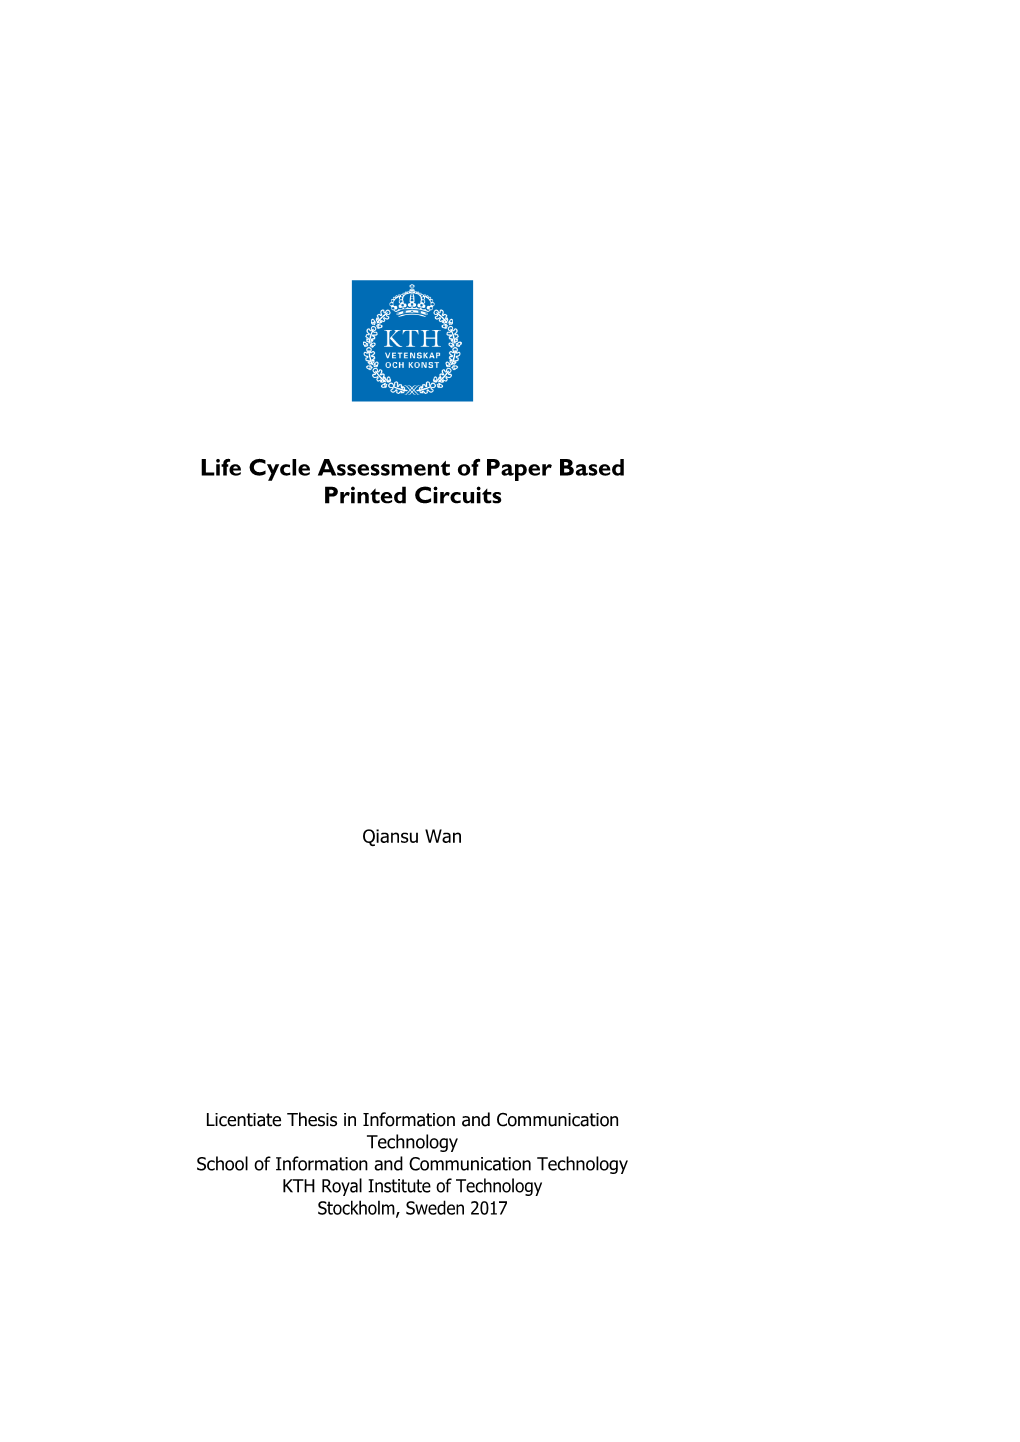 Life Cycle Assessment of Paper Based Printed Circuits